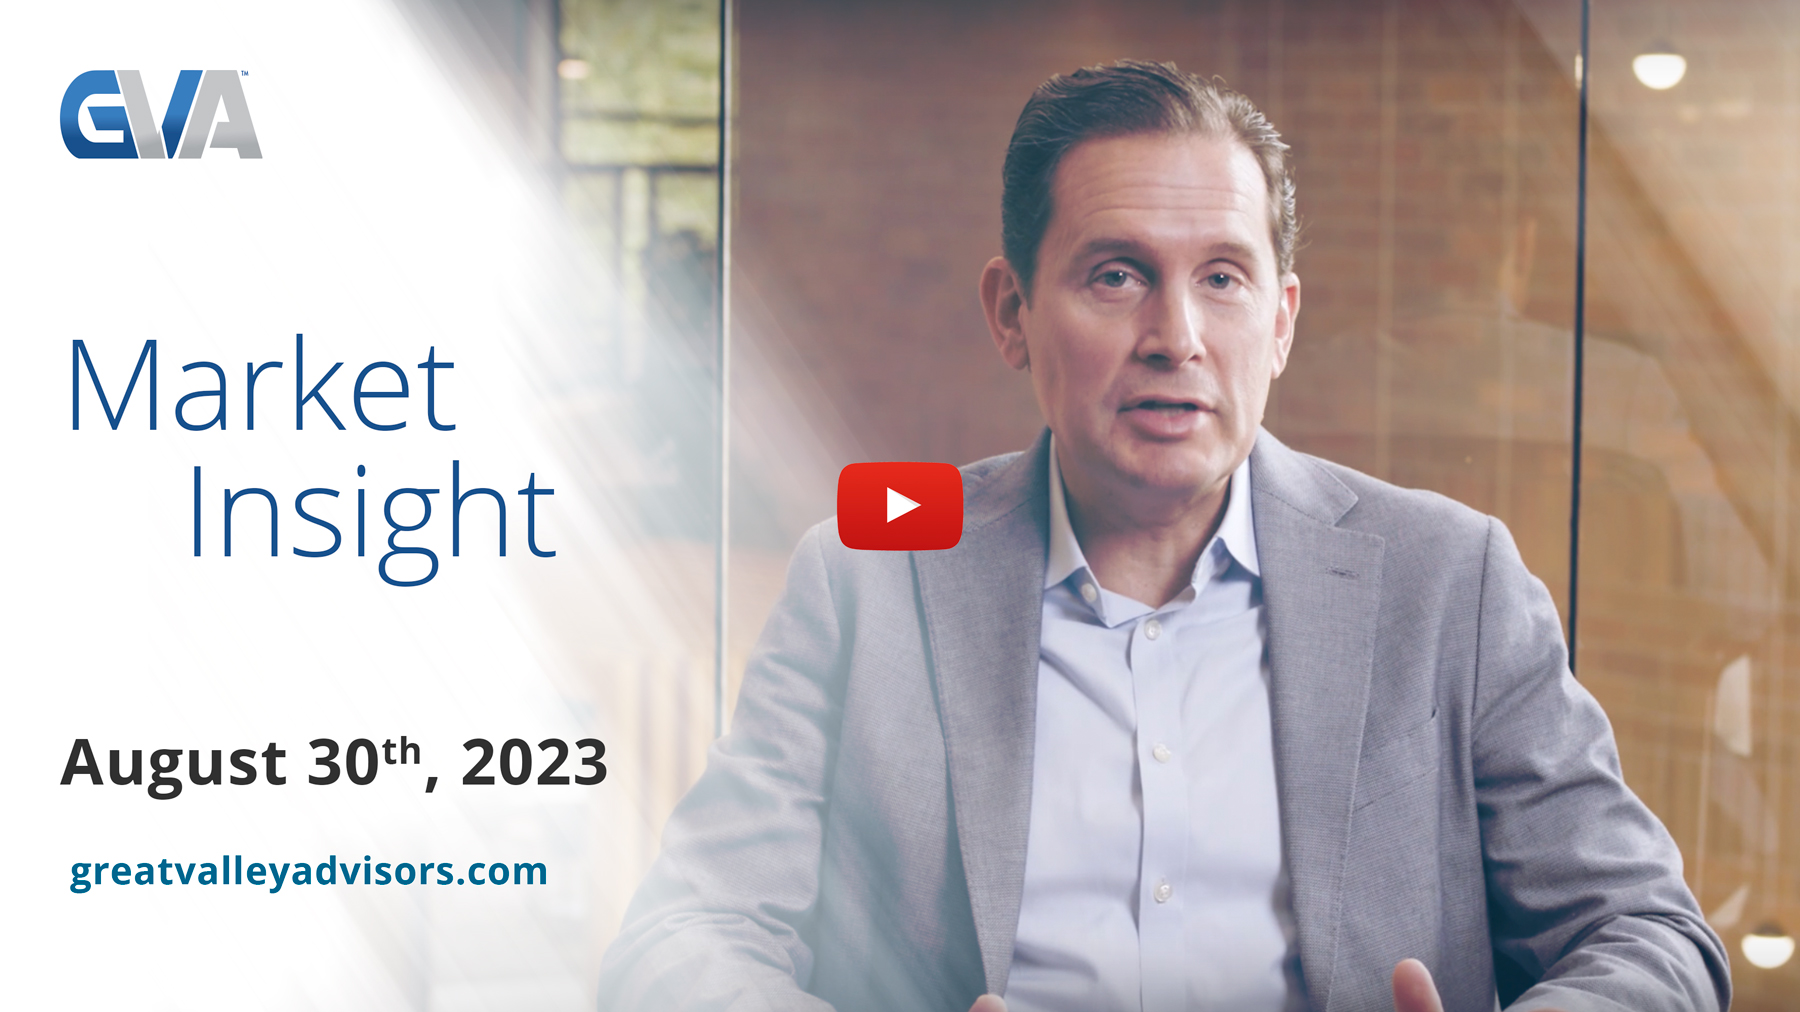 Market Insights with Eric: Episode 8, August 30th, 2023